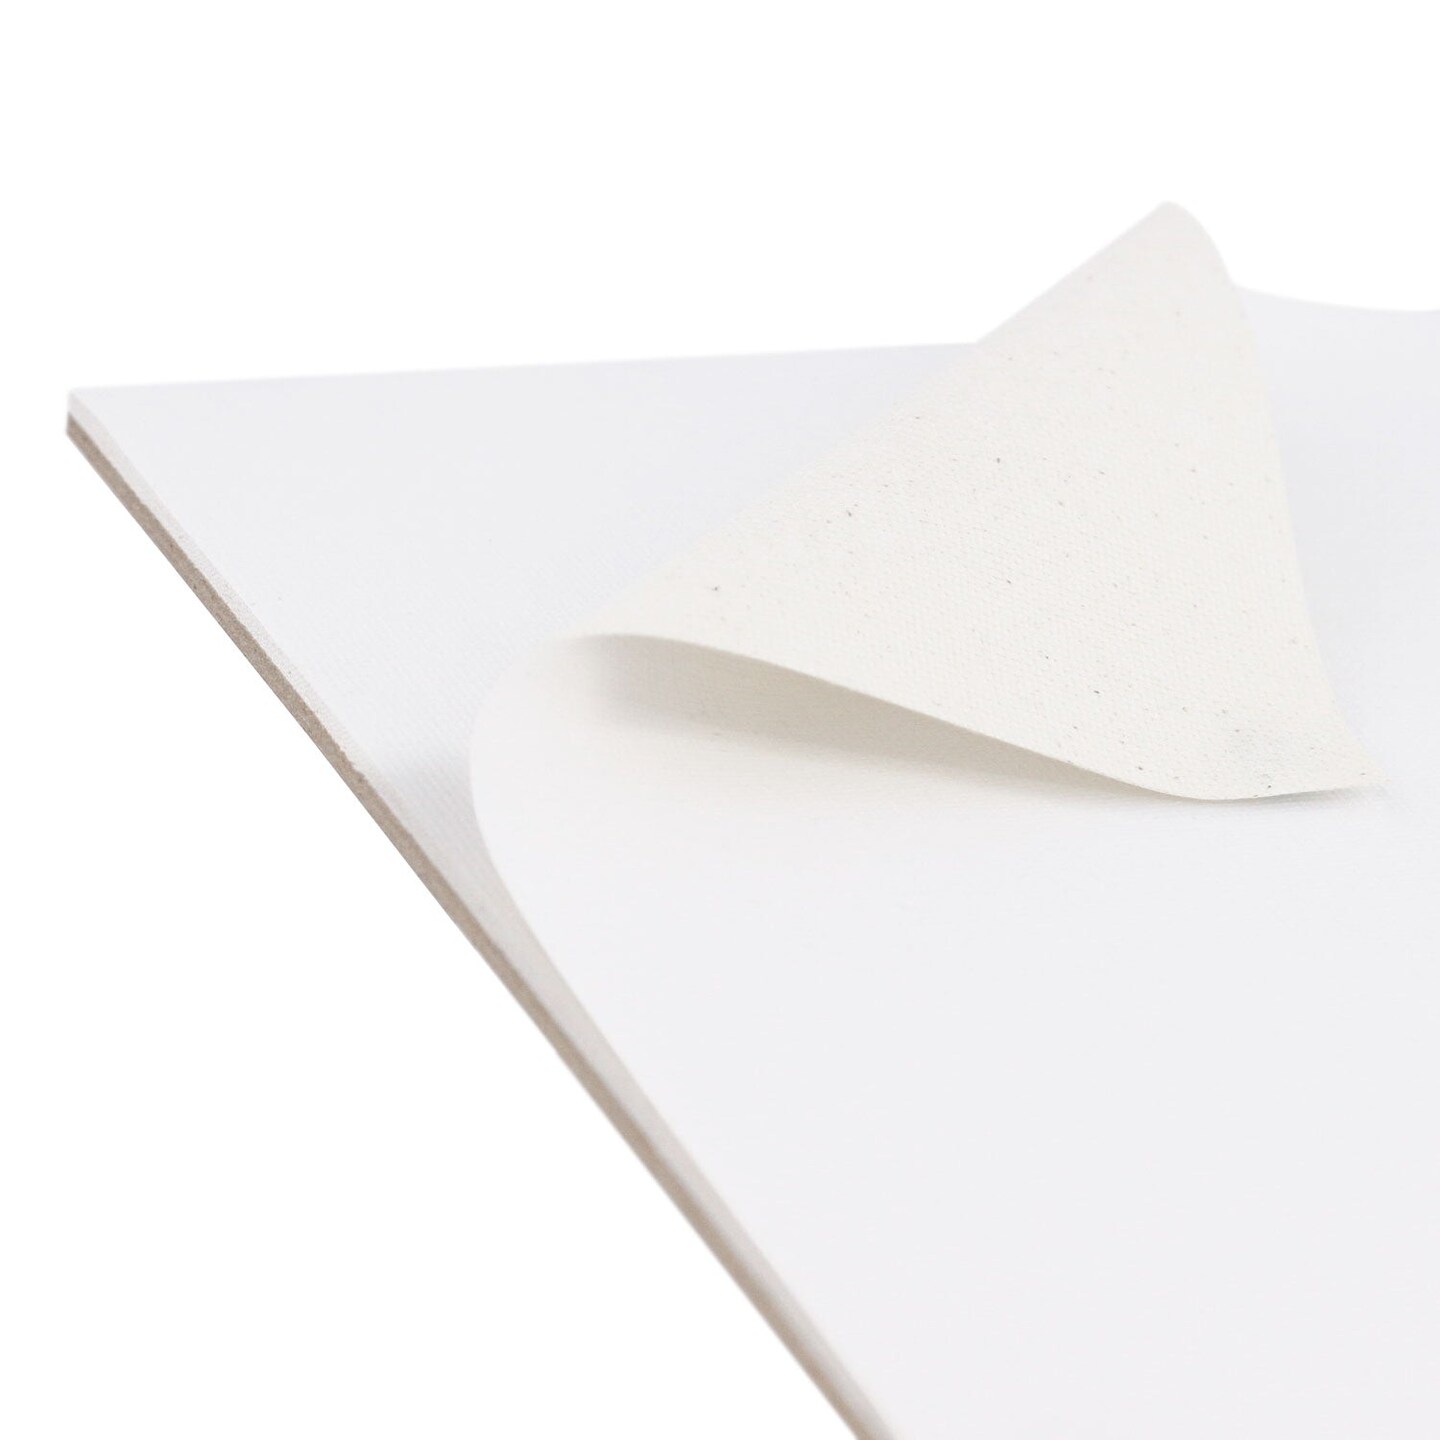 8&#x22; x 10&#x22; 10-Sheet 8-Ounce Triple Primed Acid-Free Canvas Paper Pad (Pack of 2 Pads)